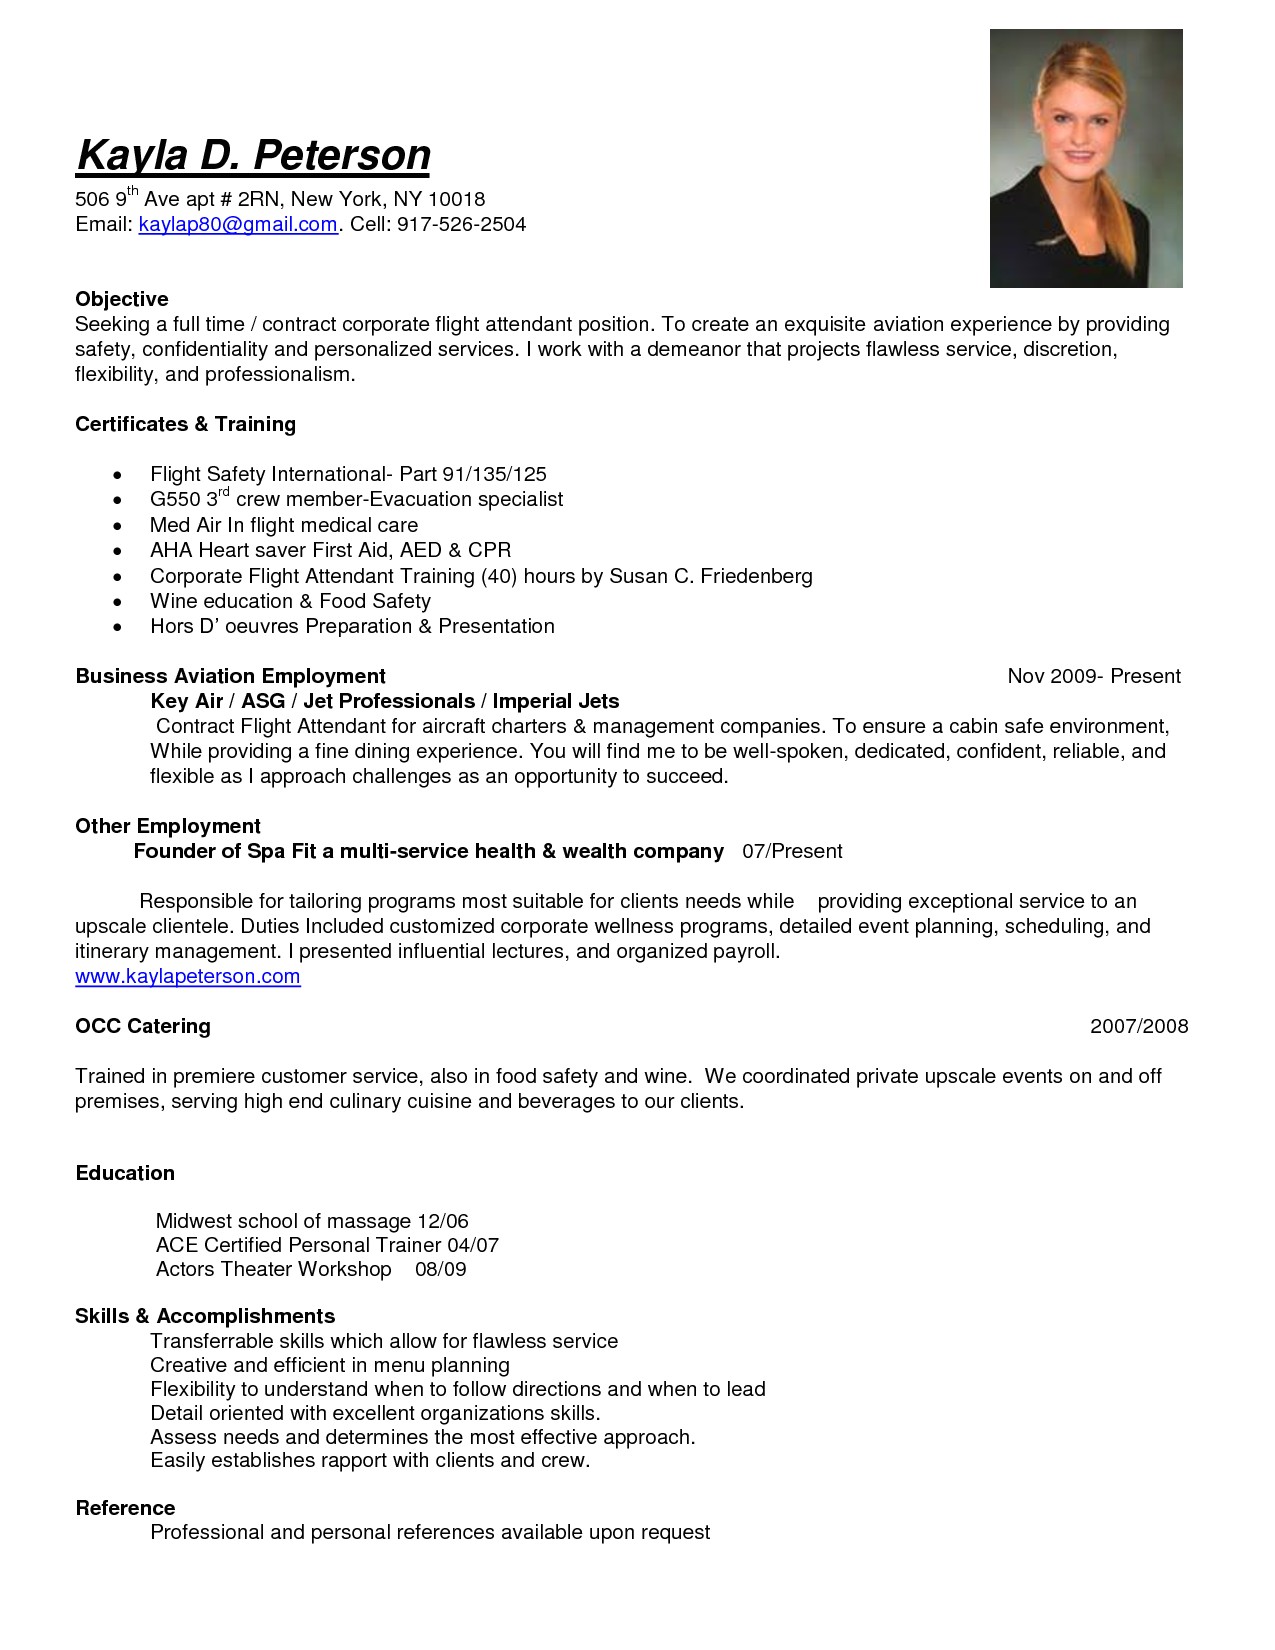 sample objective full time corporate flight attendant job position resume include list certification and t